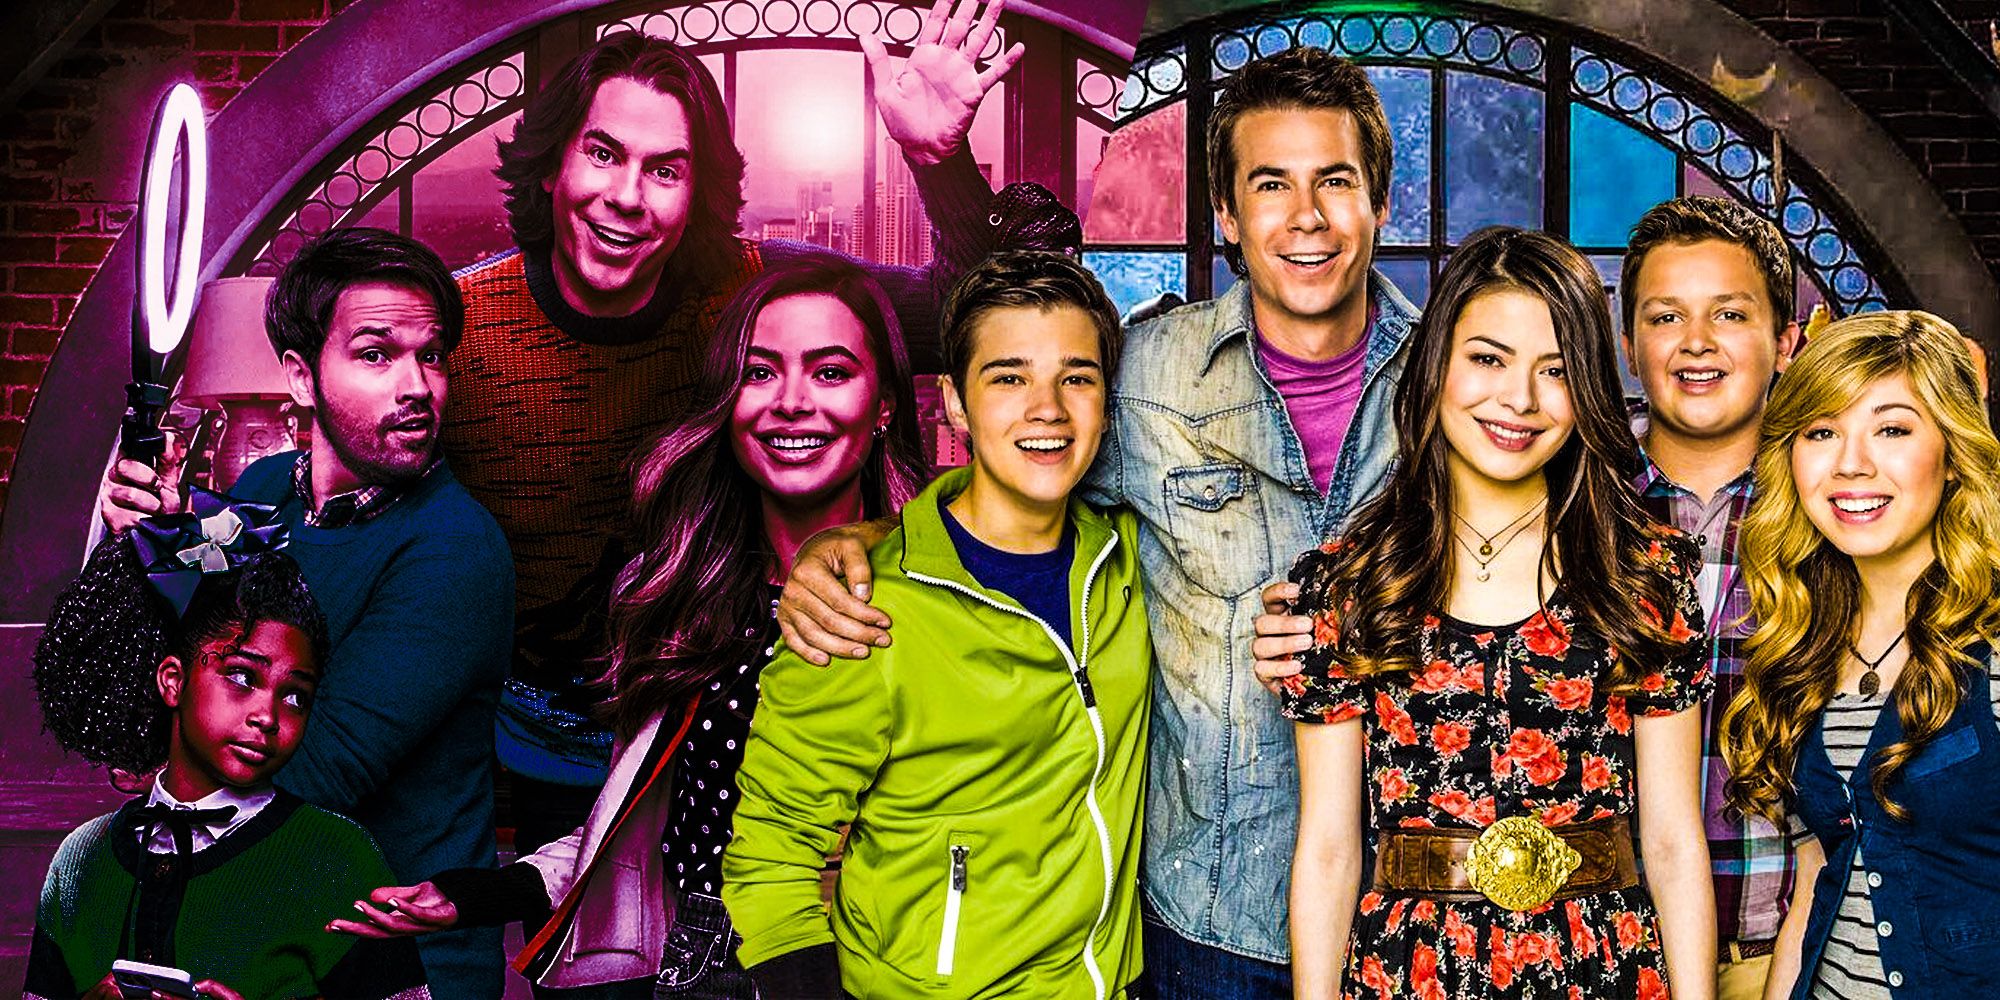 Icarly revival different from the original show